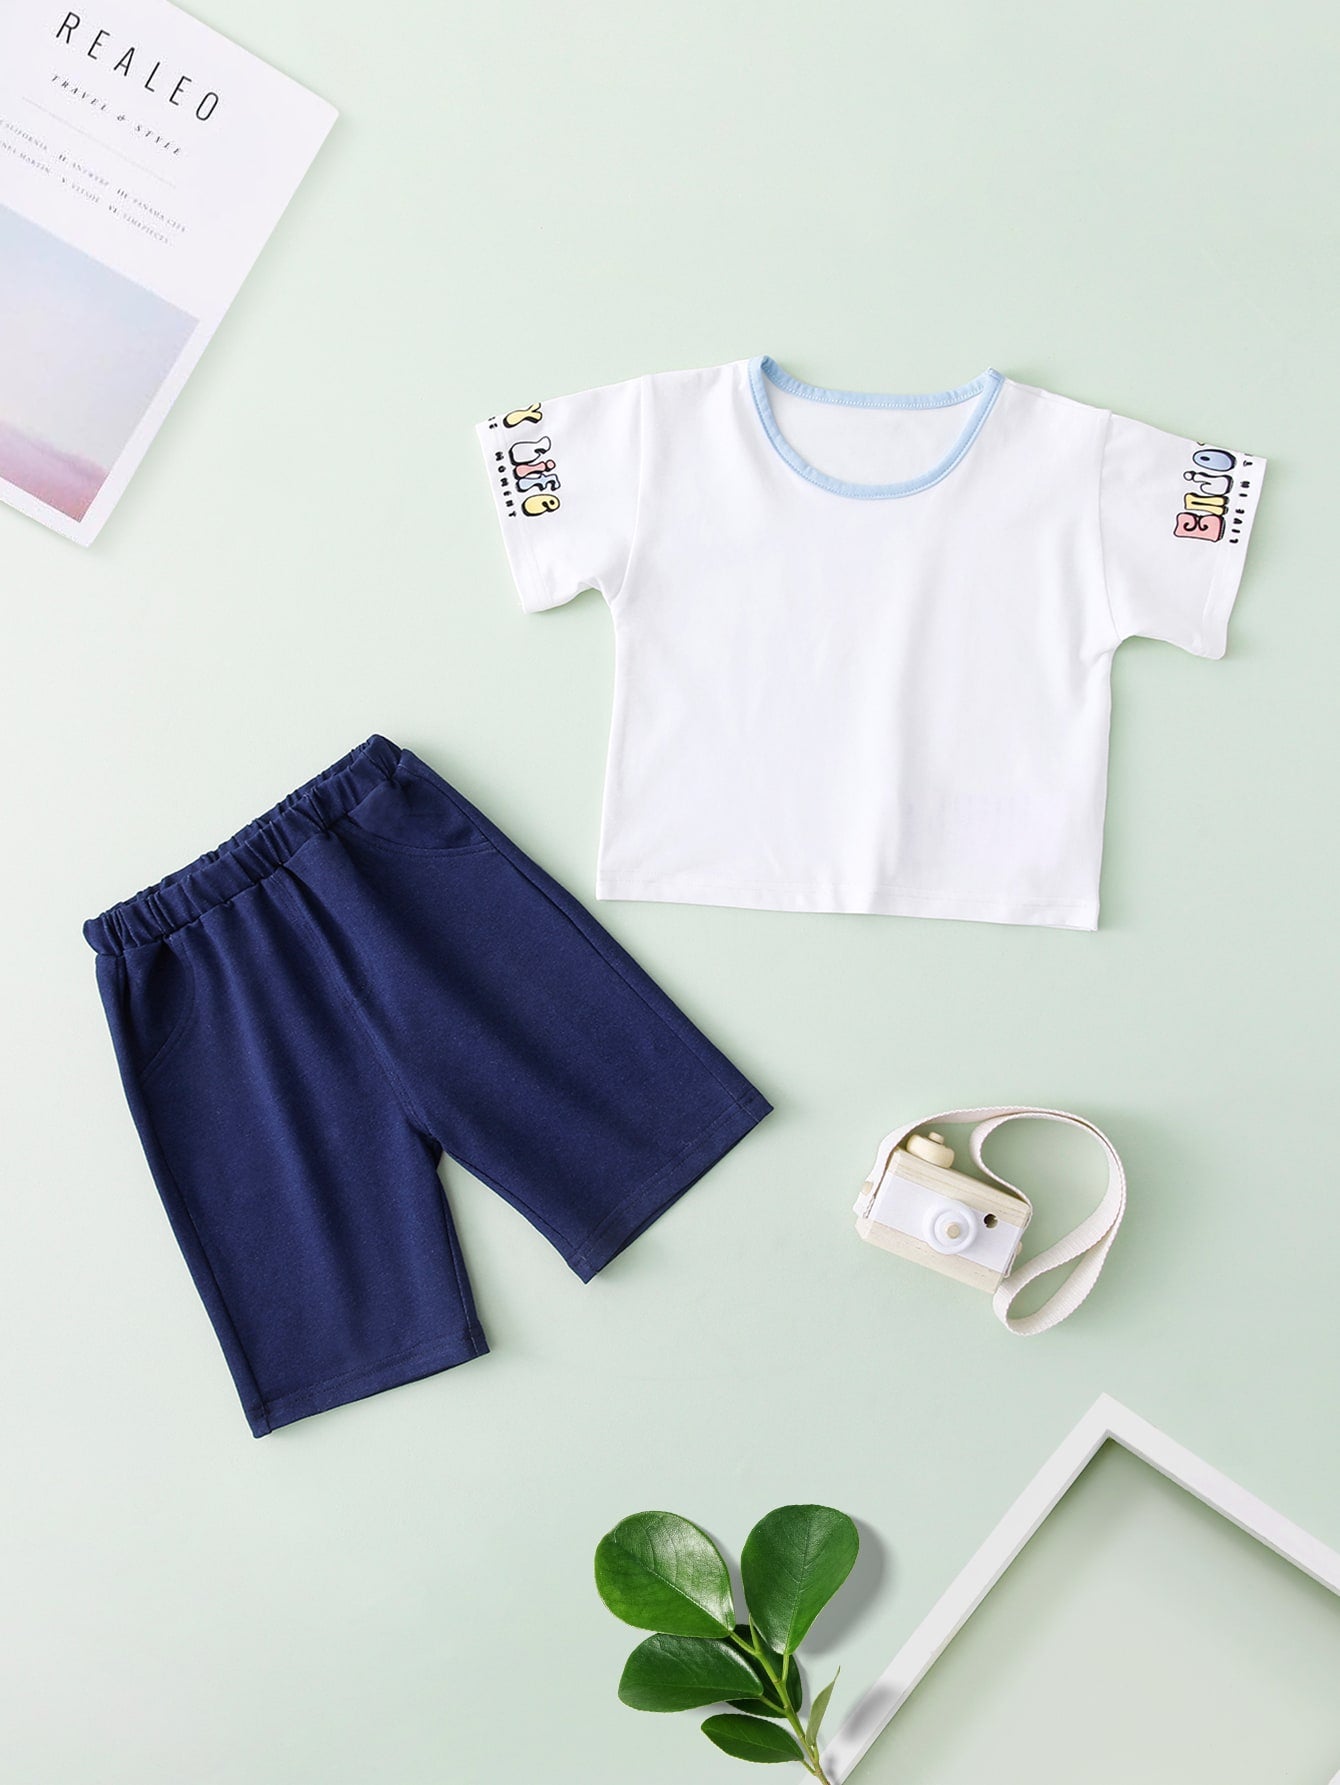 2pcs/Set Young Boy Casual Letter Print Solid Tee And Shorts Outfit, Lightweight Material For Summer